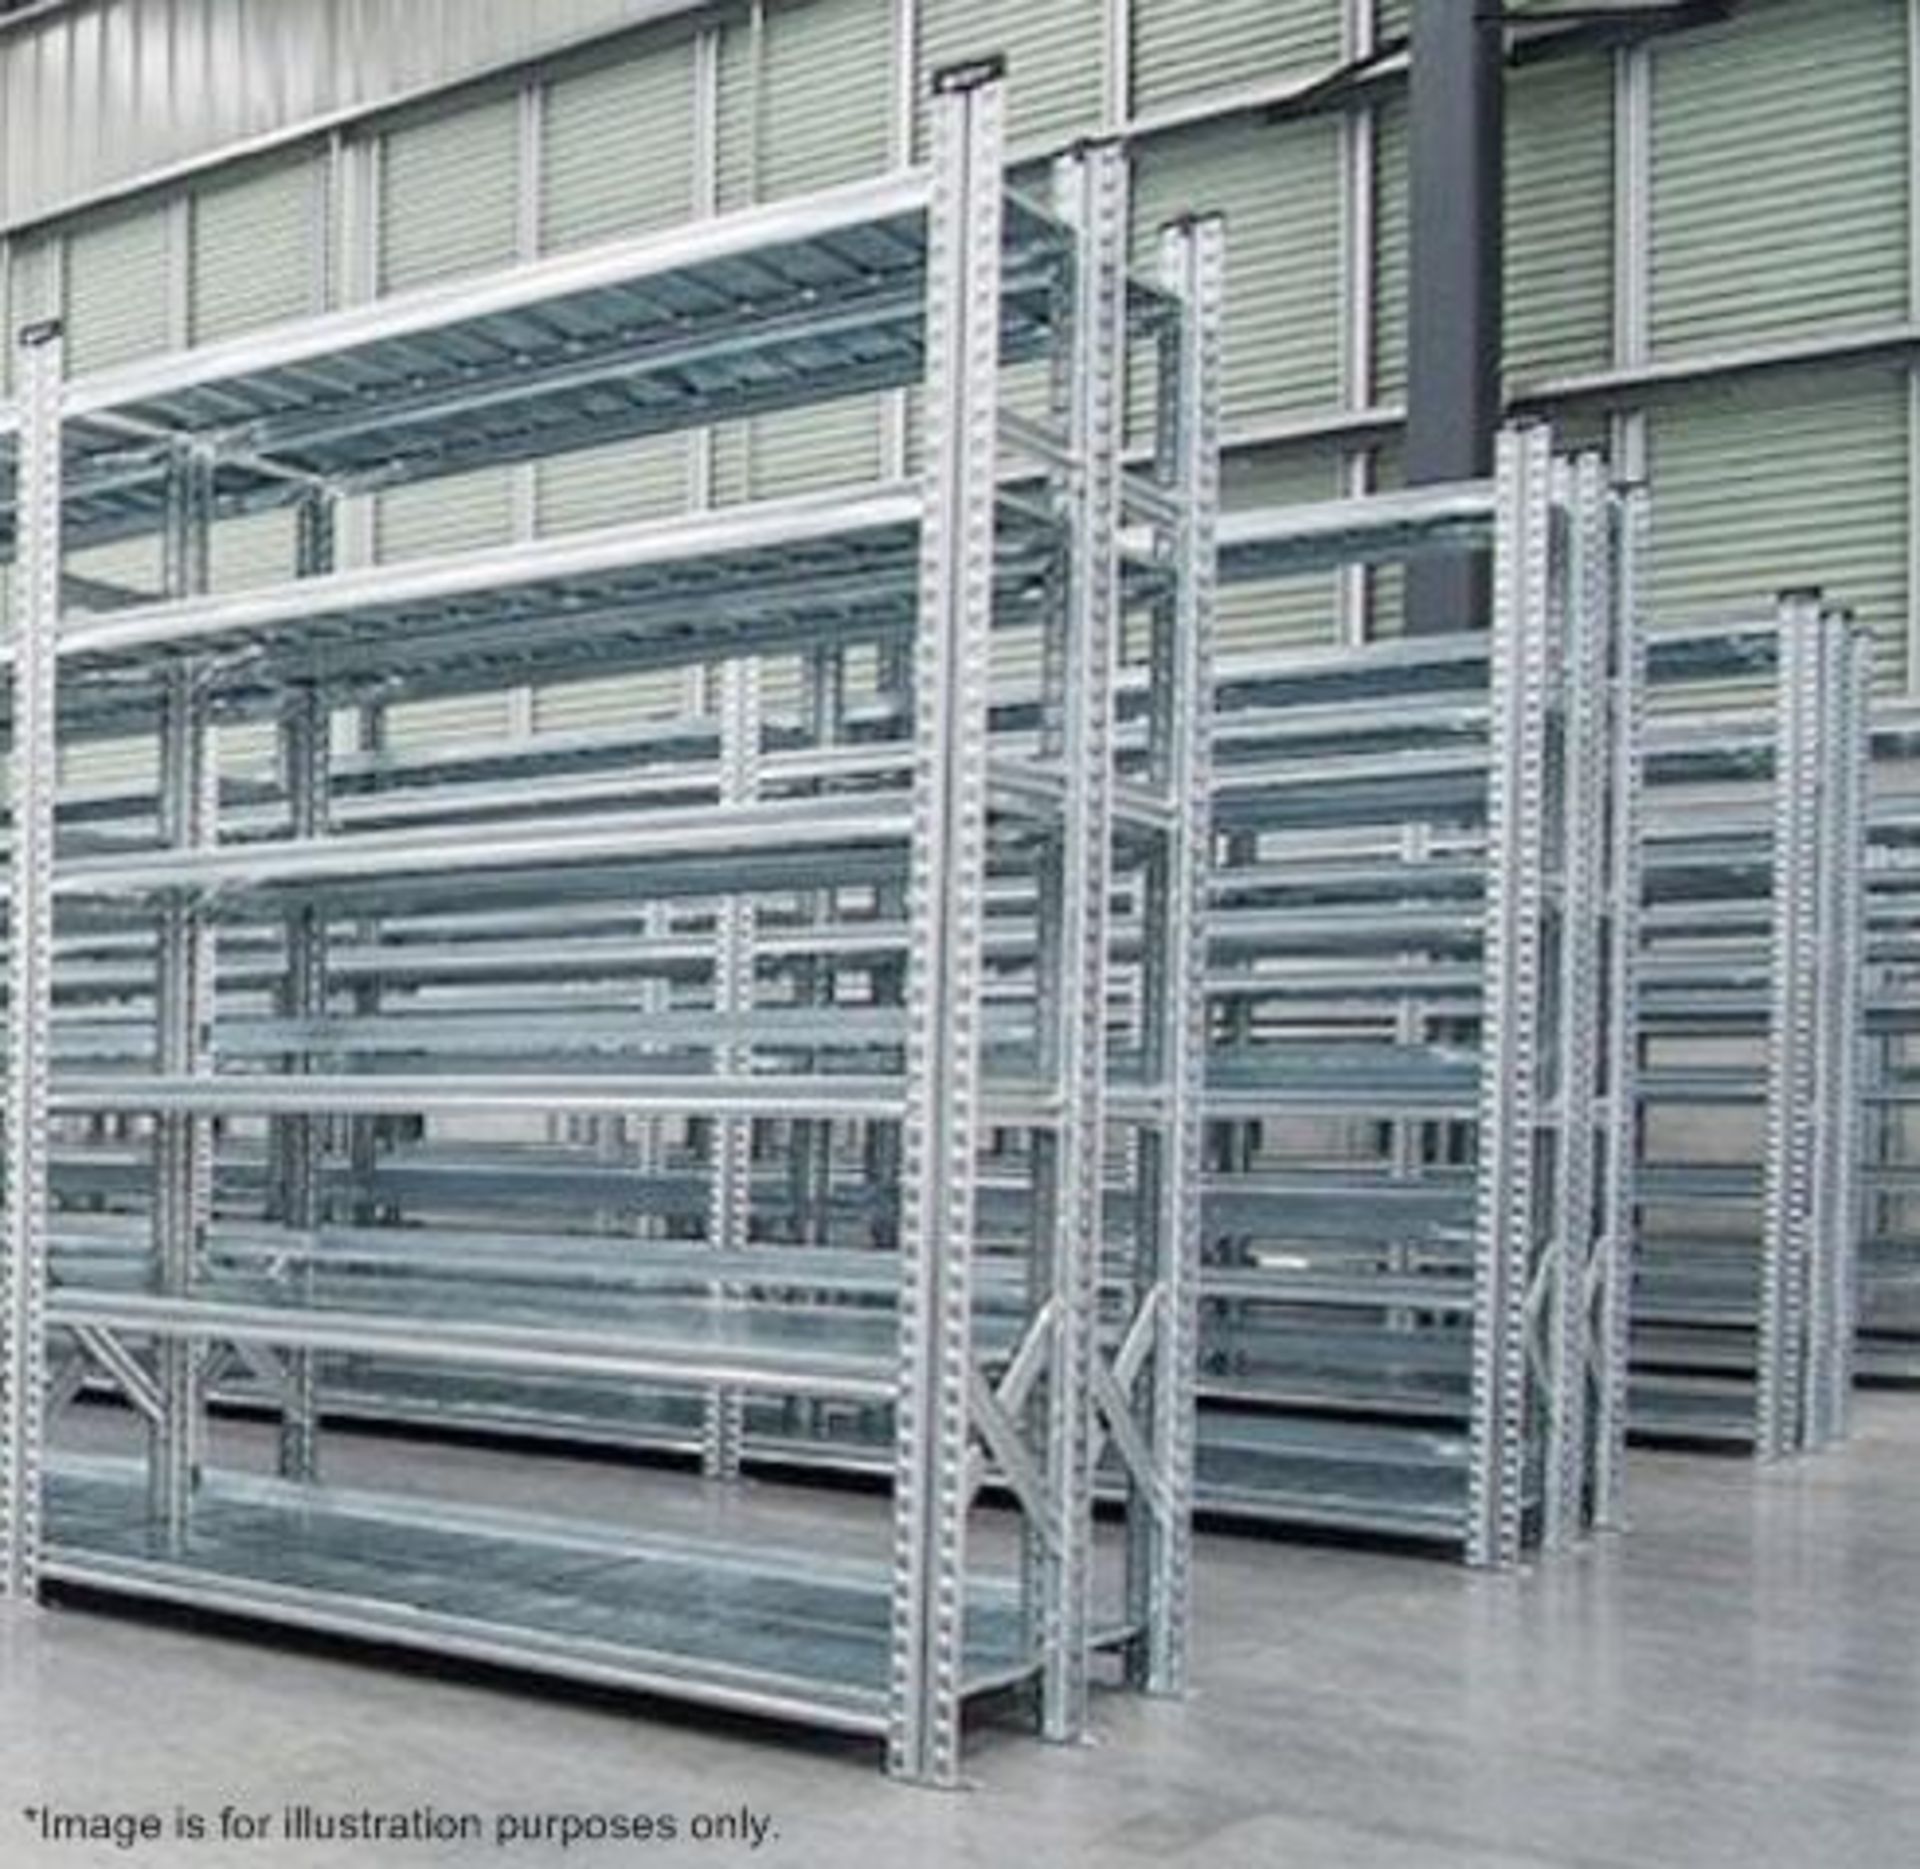 9 x Bays of Metalsistem Steel Modular Storage Shelving - Includes 58 Pieces - Recently Removed From - Image 14 of 17